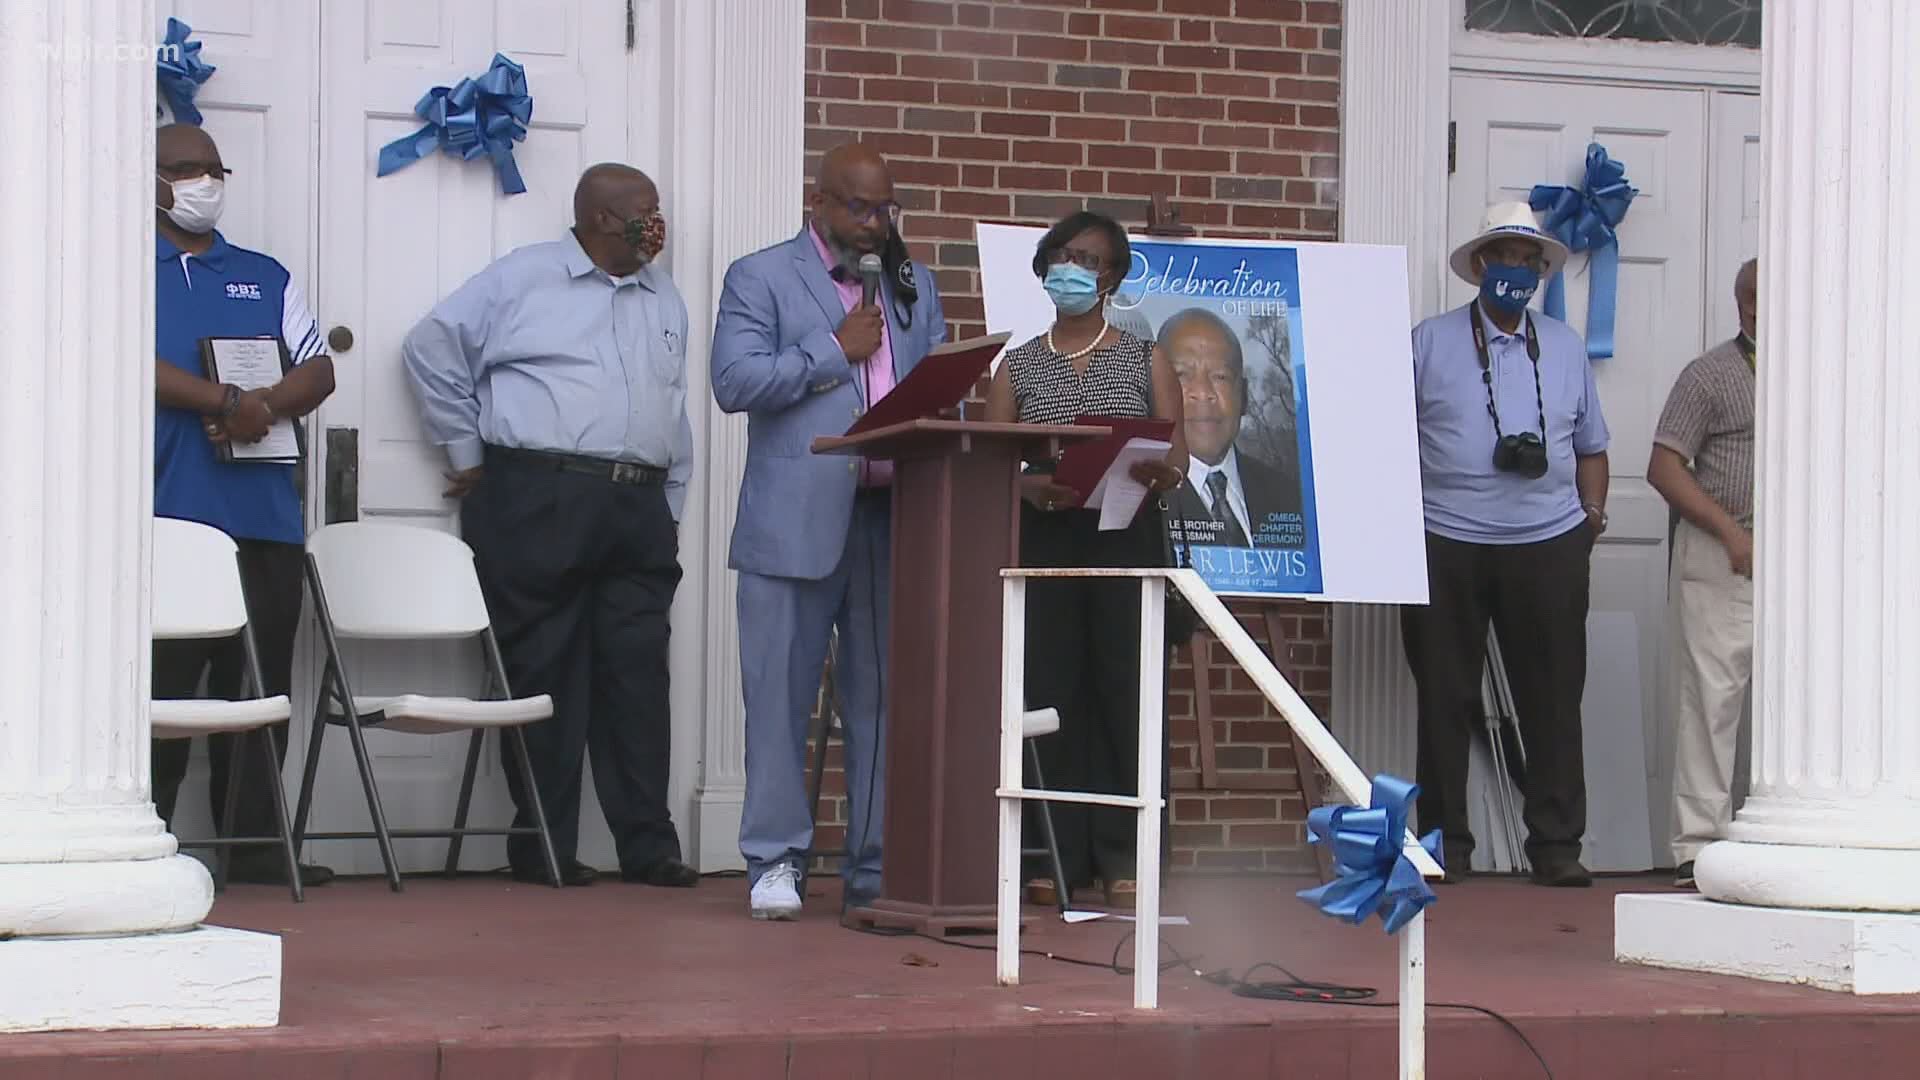 People honored the life of the civil rights icon at the Greater Warner Tabernacle AME Zion Church in East Tennessee.